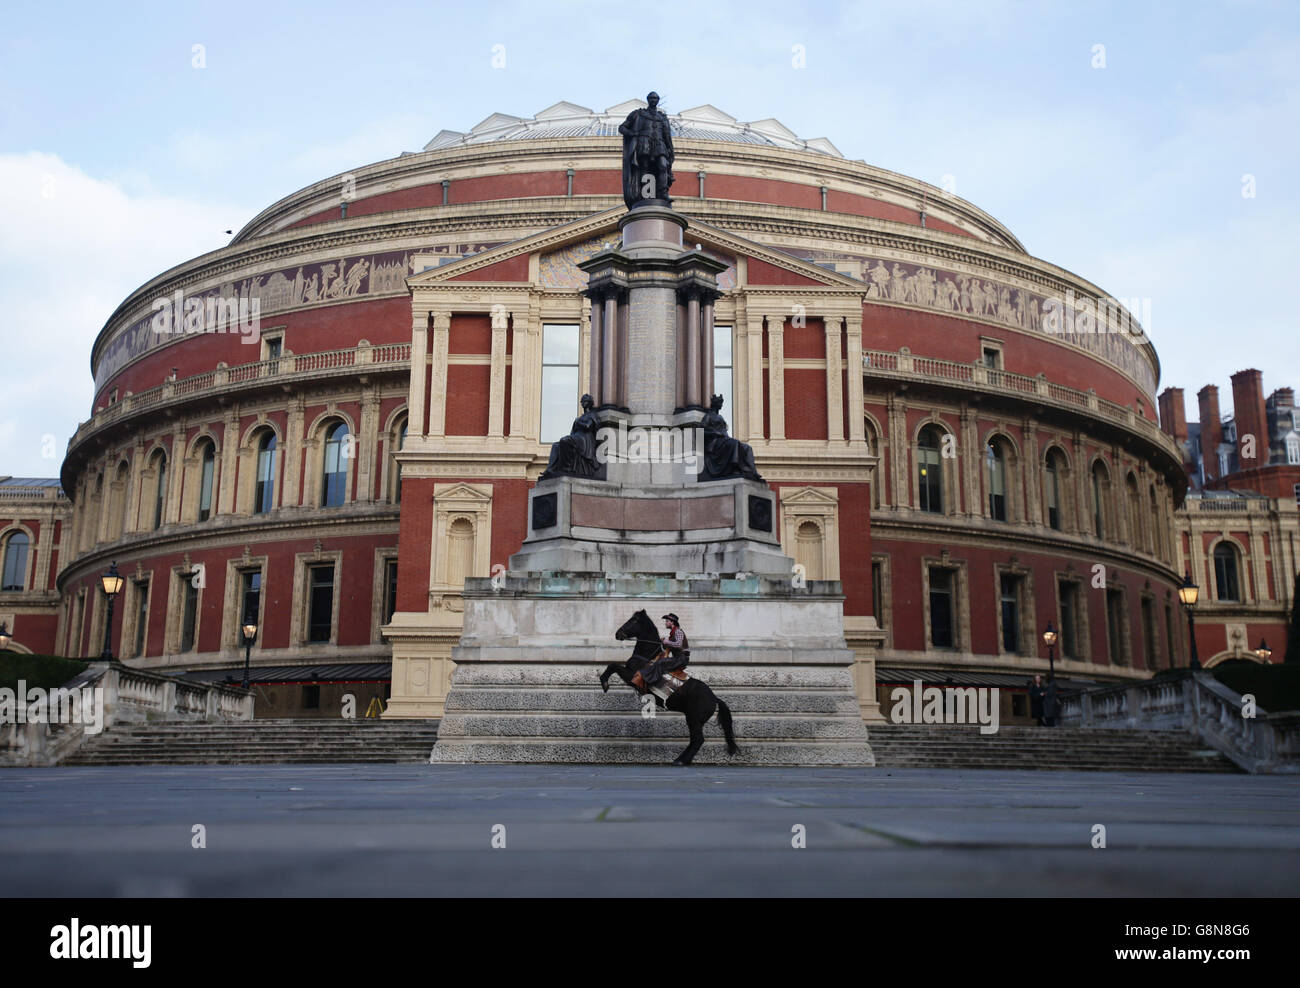 Stunt horse-riding cowboy Ollie Bass and his horse Rocky pose on the steps of the Royal Albert Hall, London, to promote a forthcoming Western Music in Concert show at the venue. Stock Photo